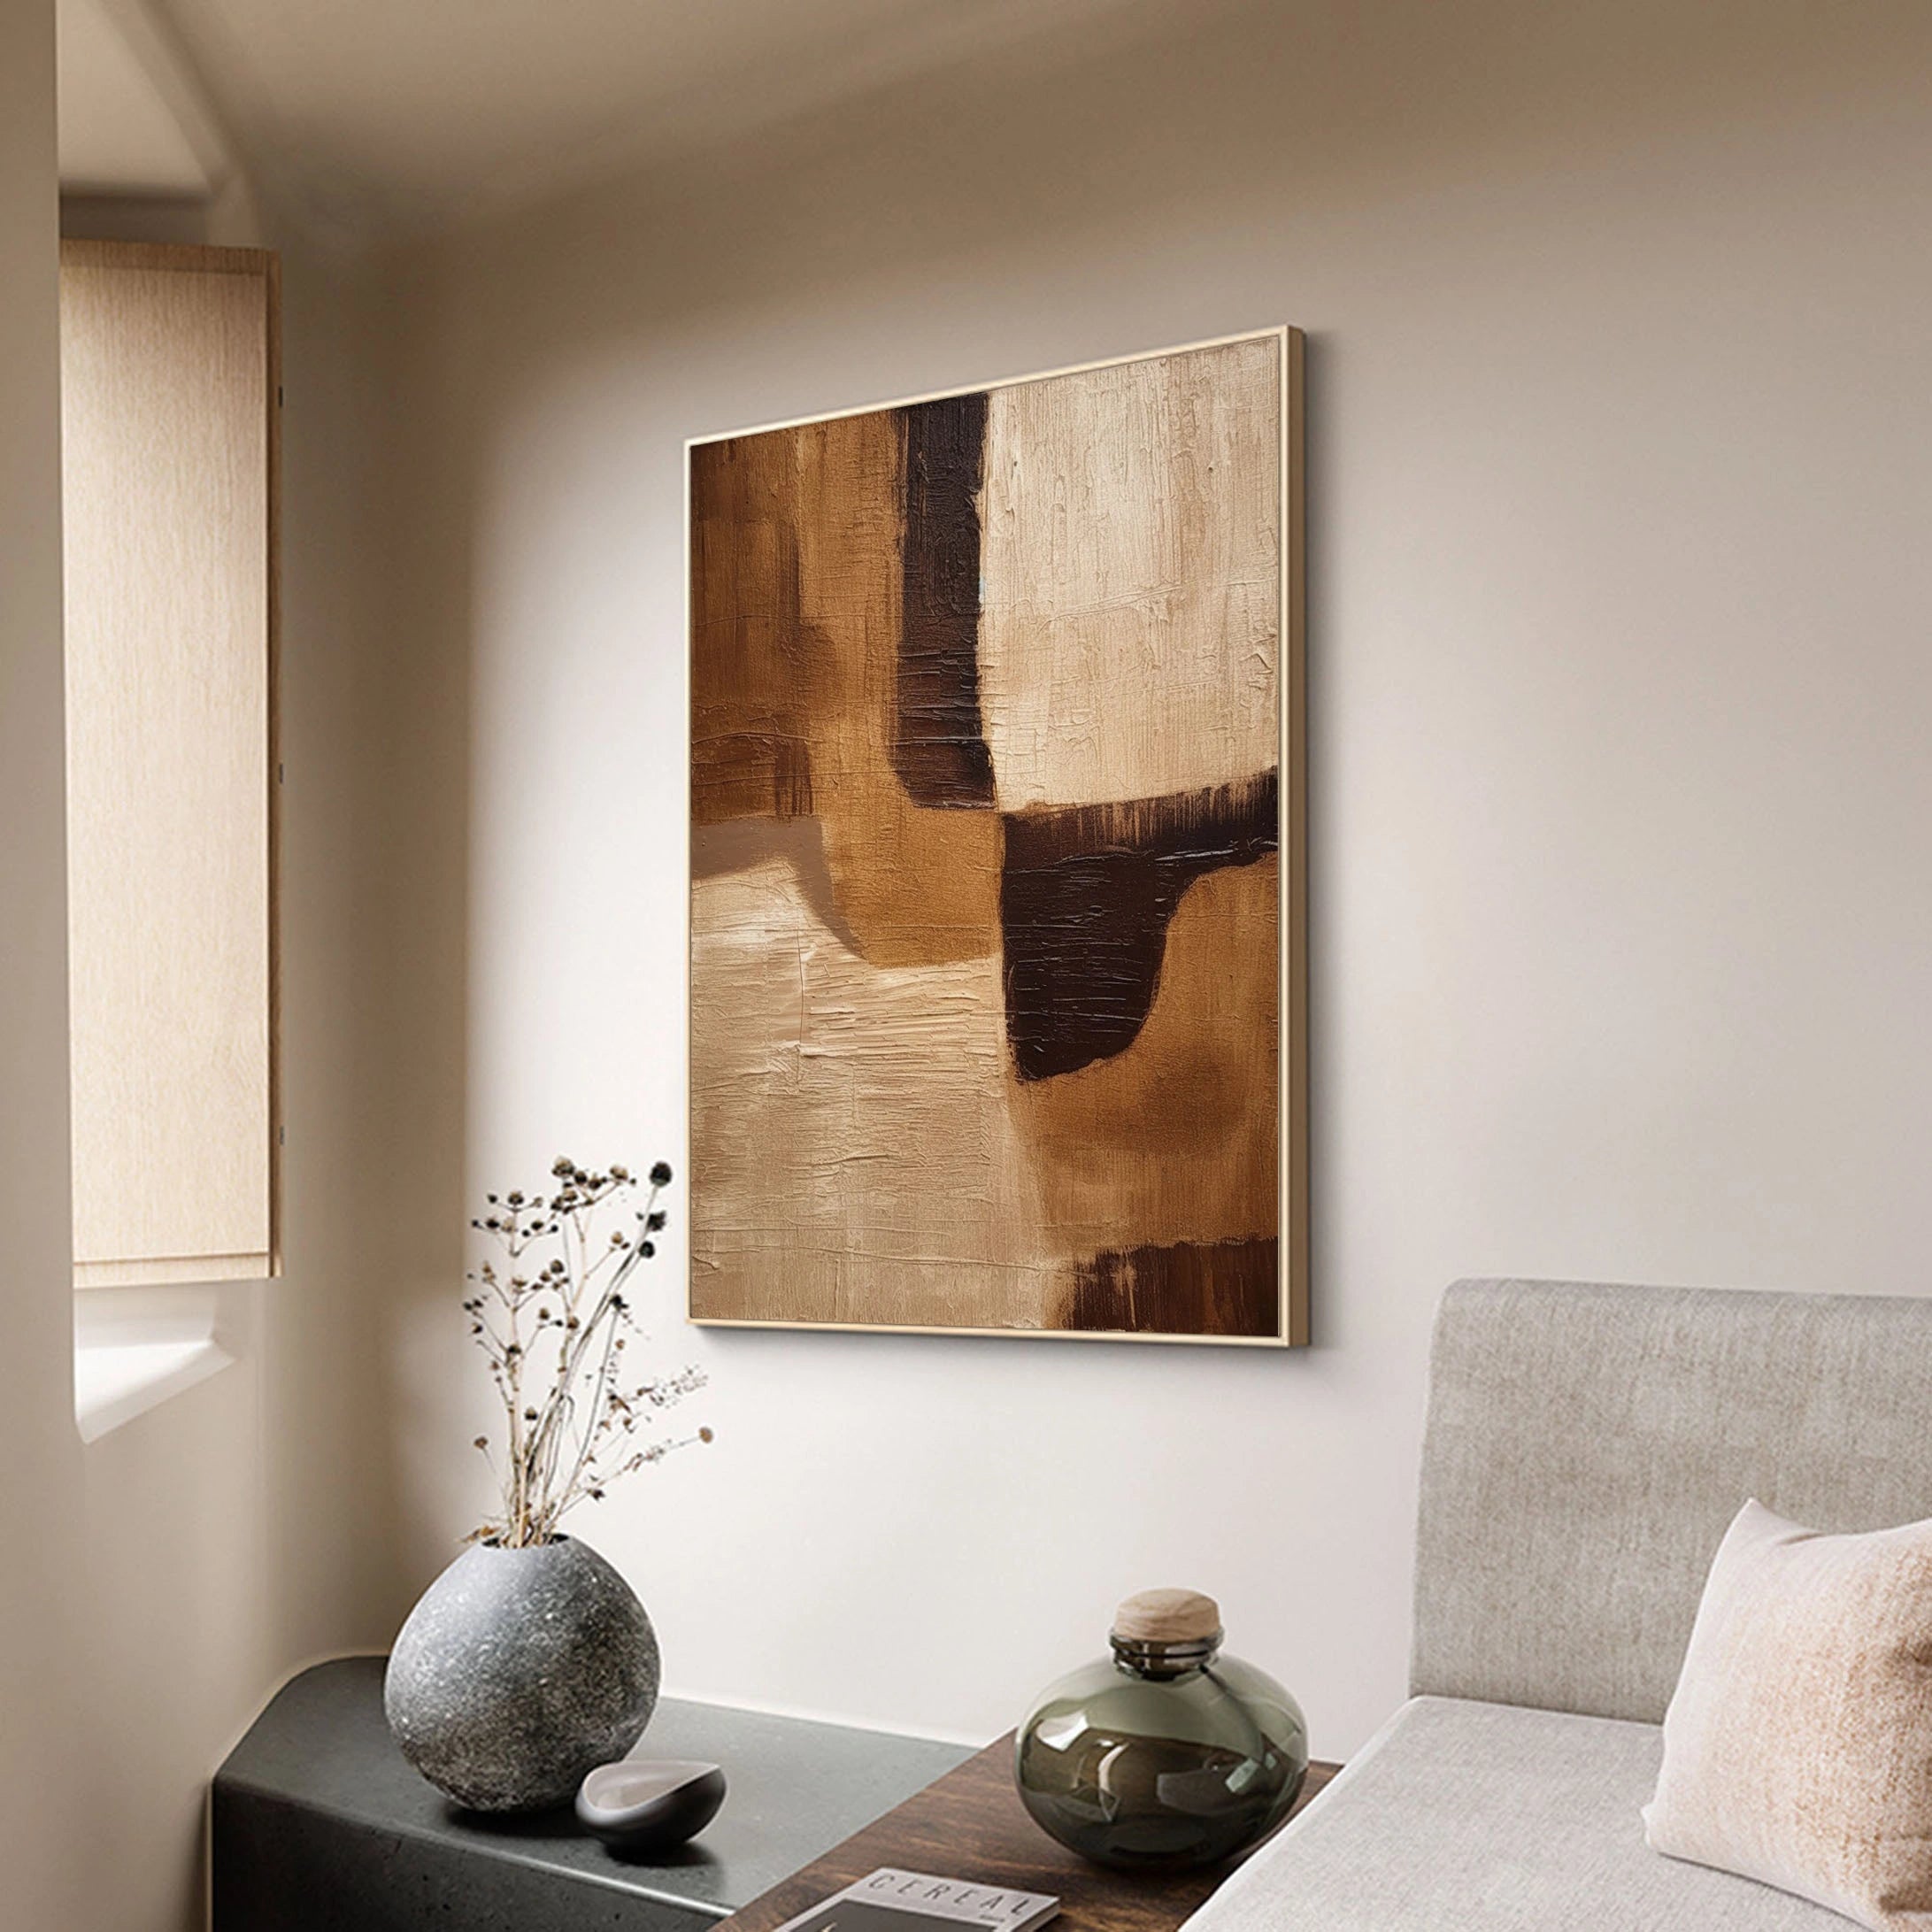 Brown and Beige Geometric Wabi Sabi Oversized Painting Abstract Wall Decor